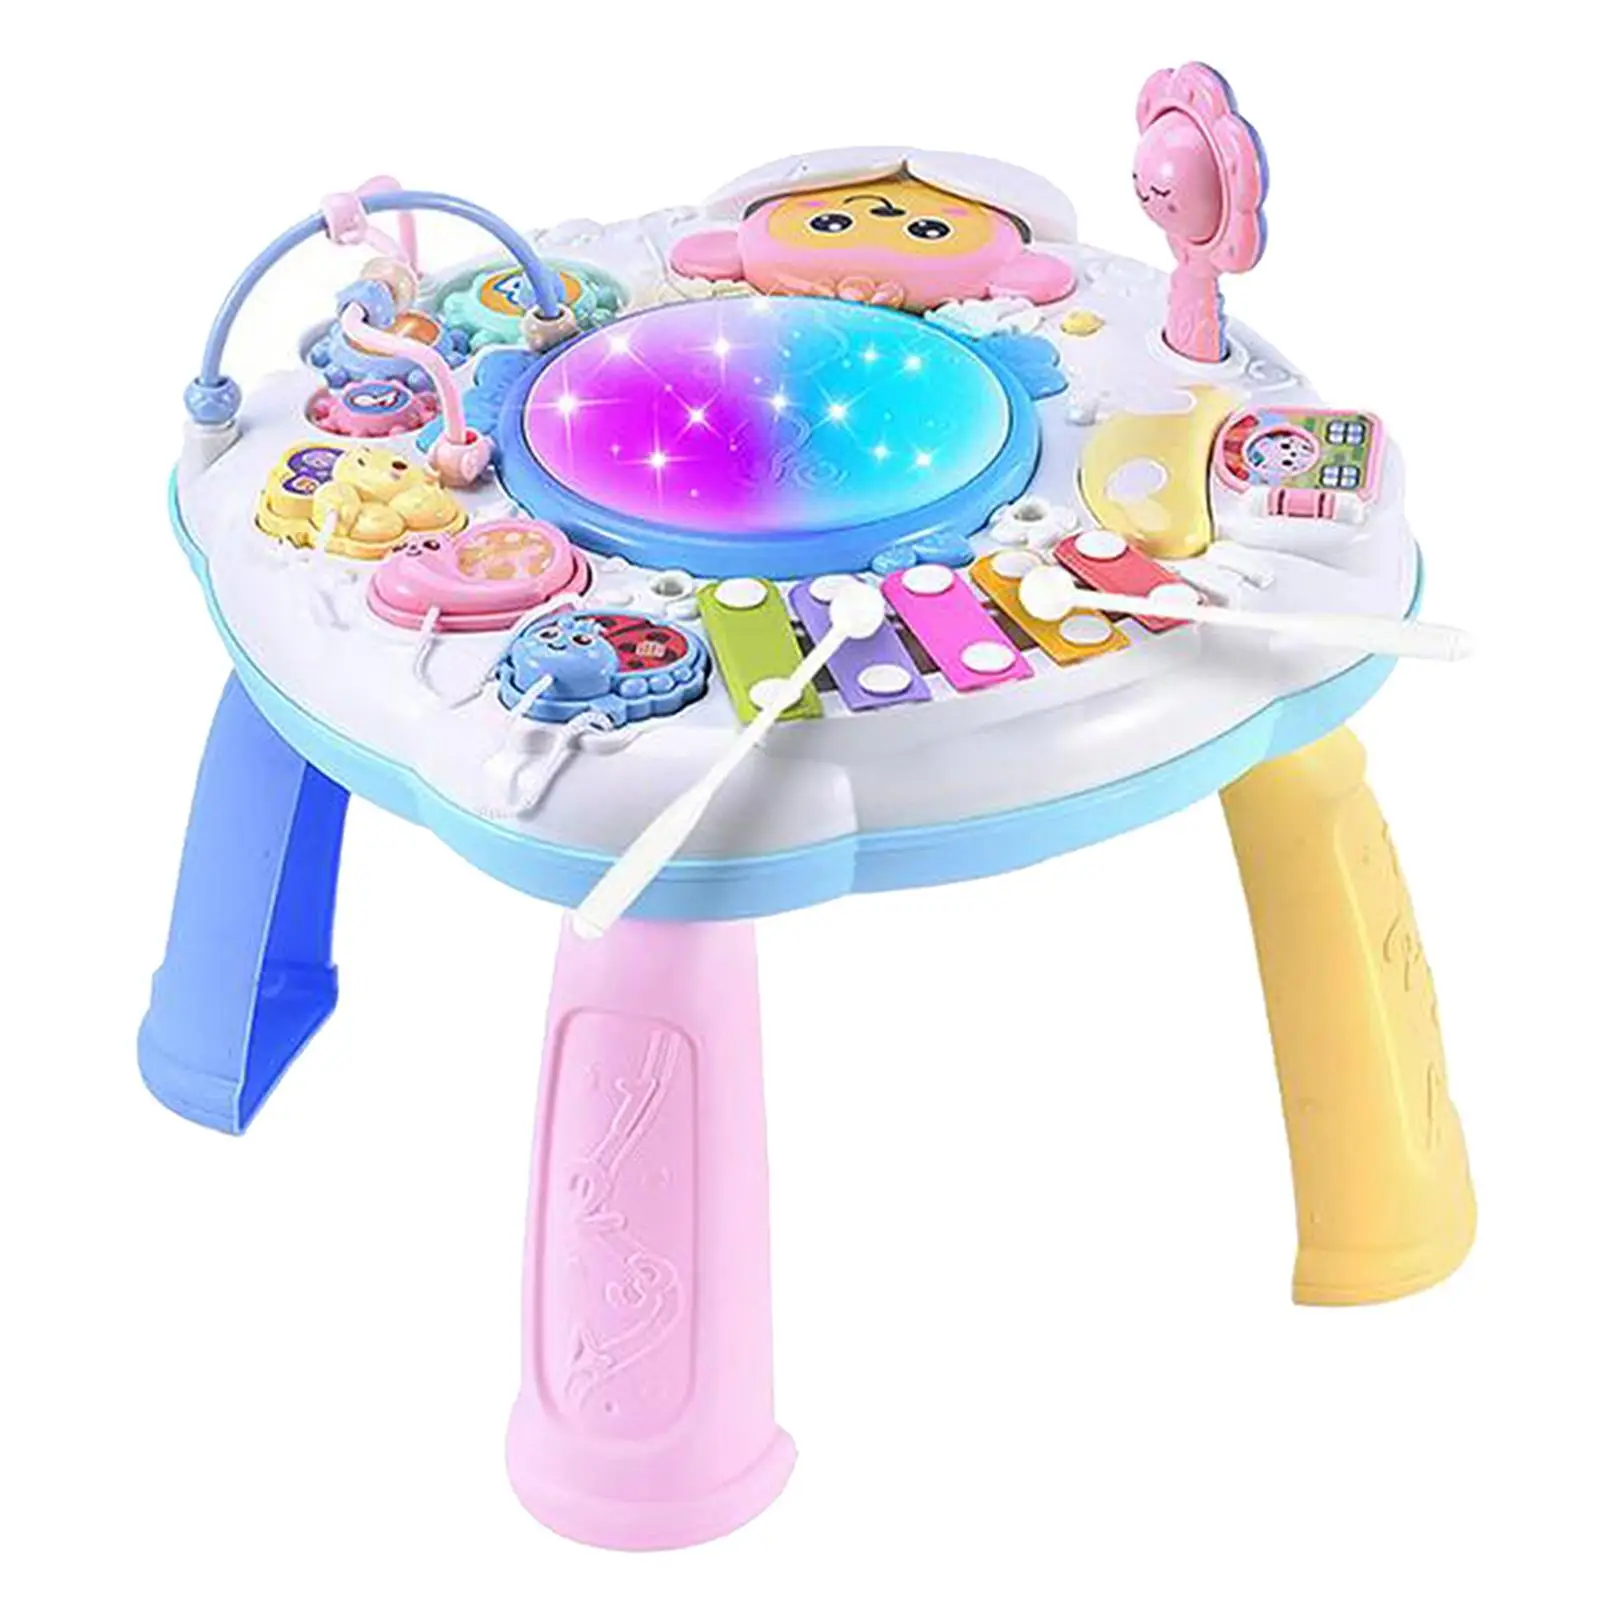 1 Set Musical Activity Table Early Education Learning Table Toys Music Activity Center Table for Kids Boys Girls Birthday Gift